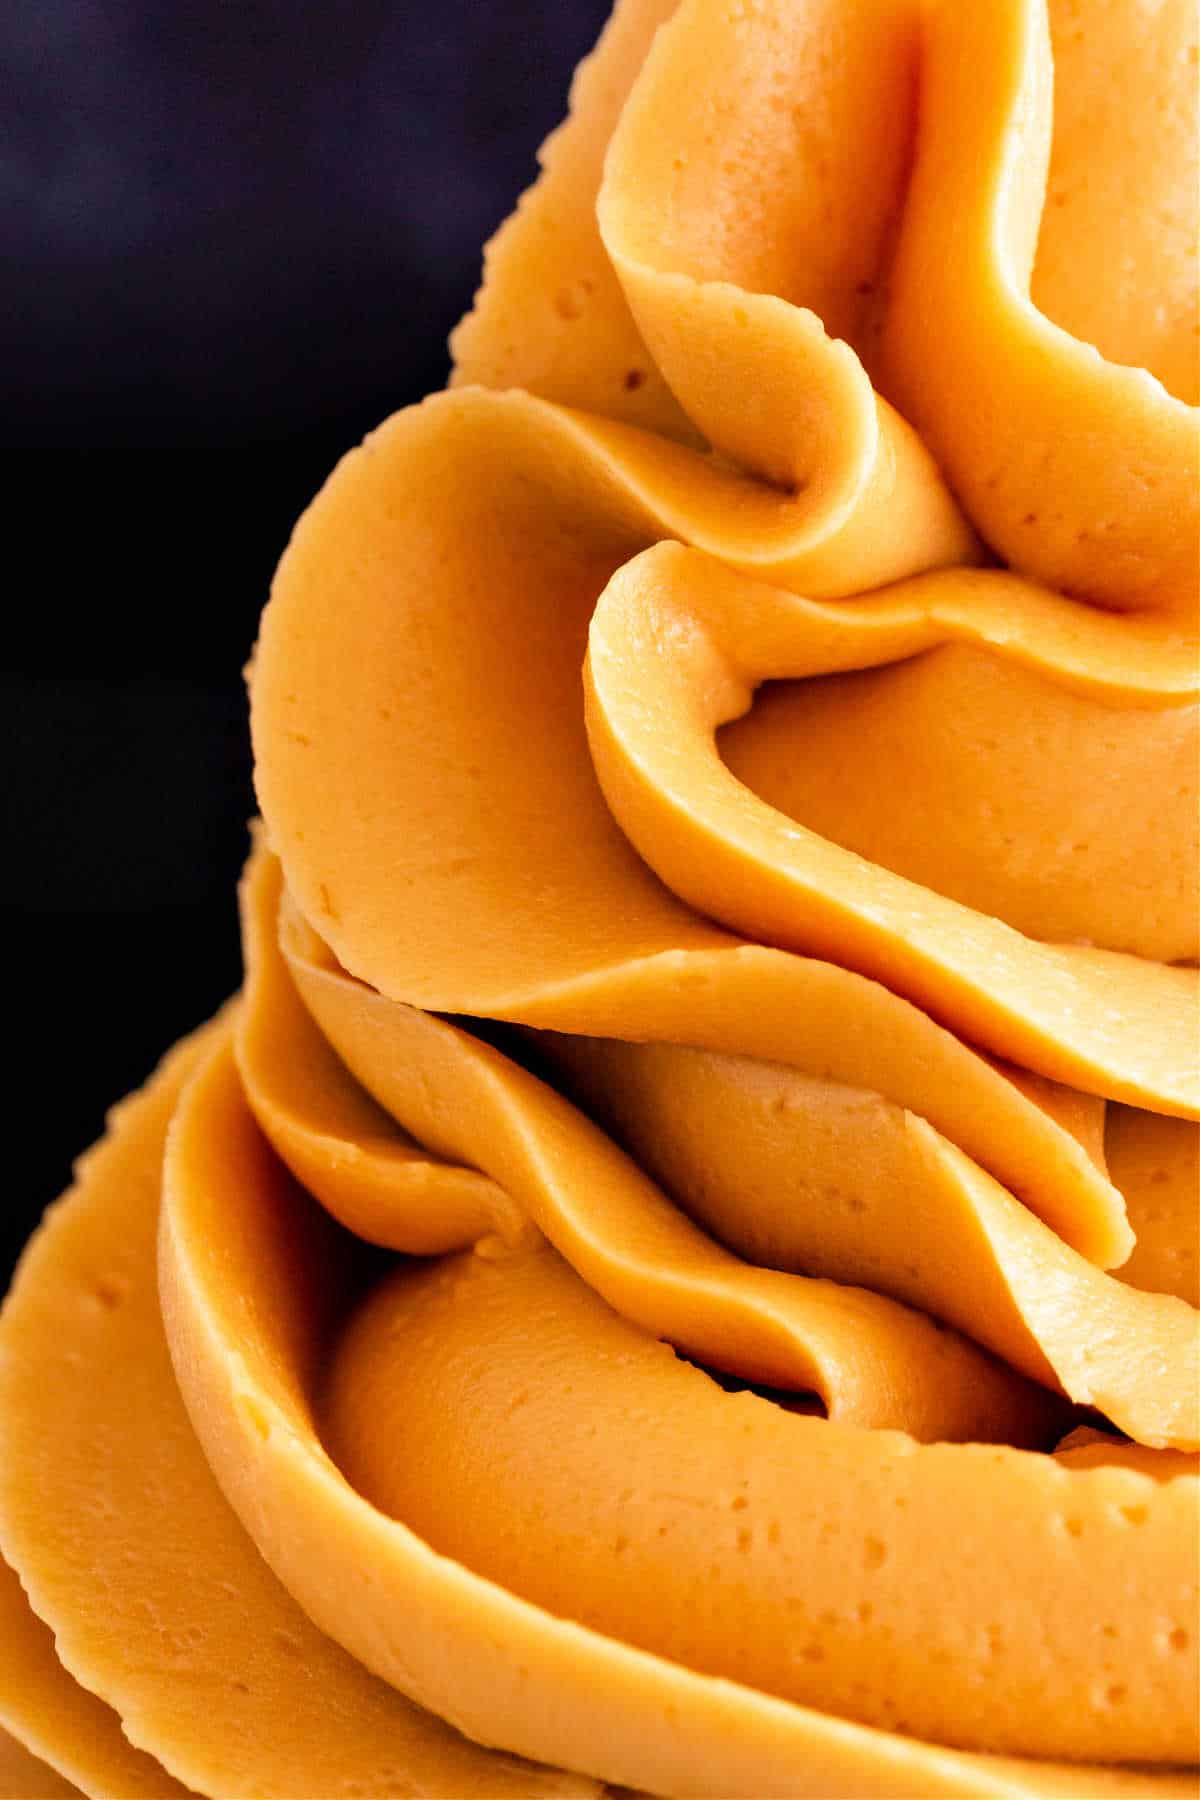 An extreme close-up of piped caramel frosting showing the smooth and fluffy texture.